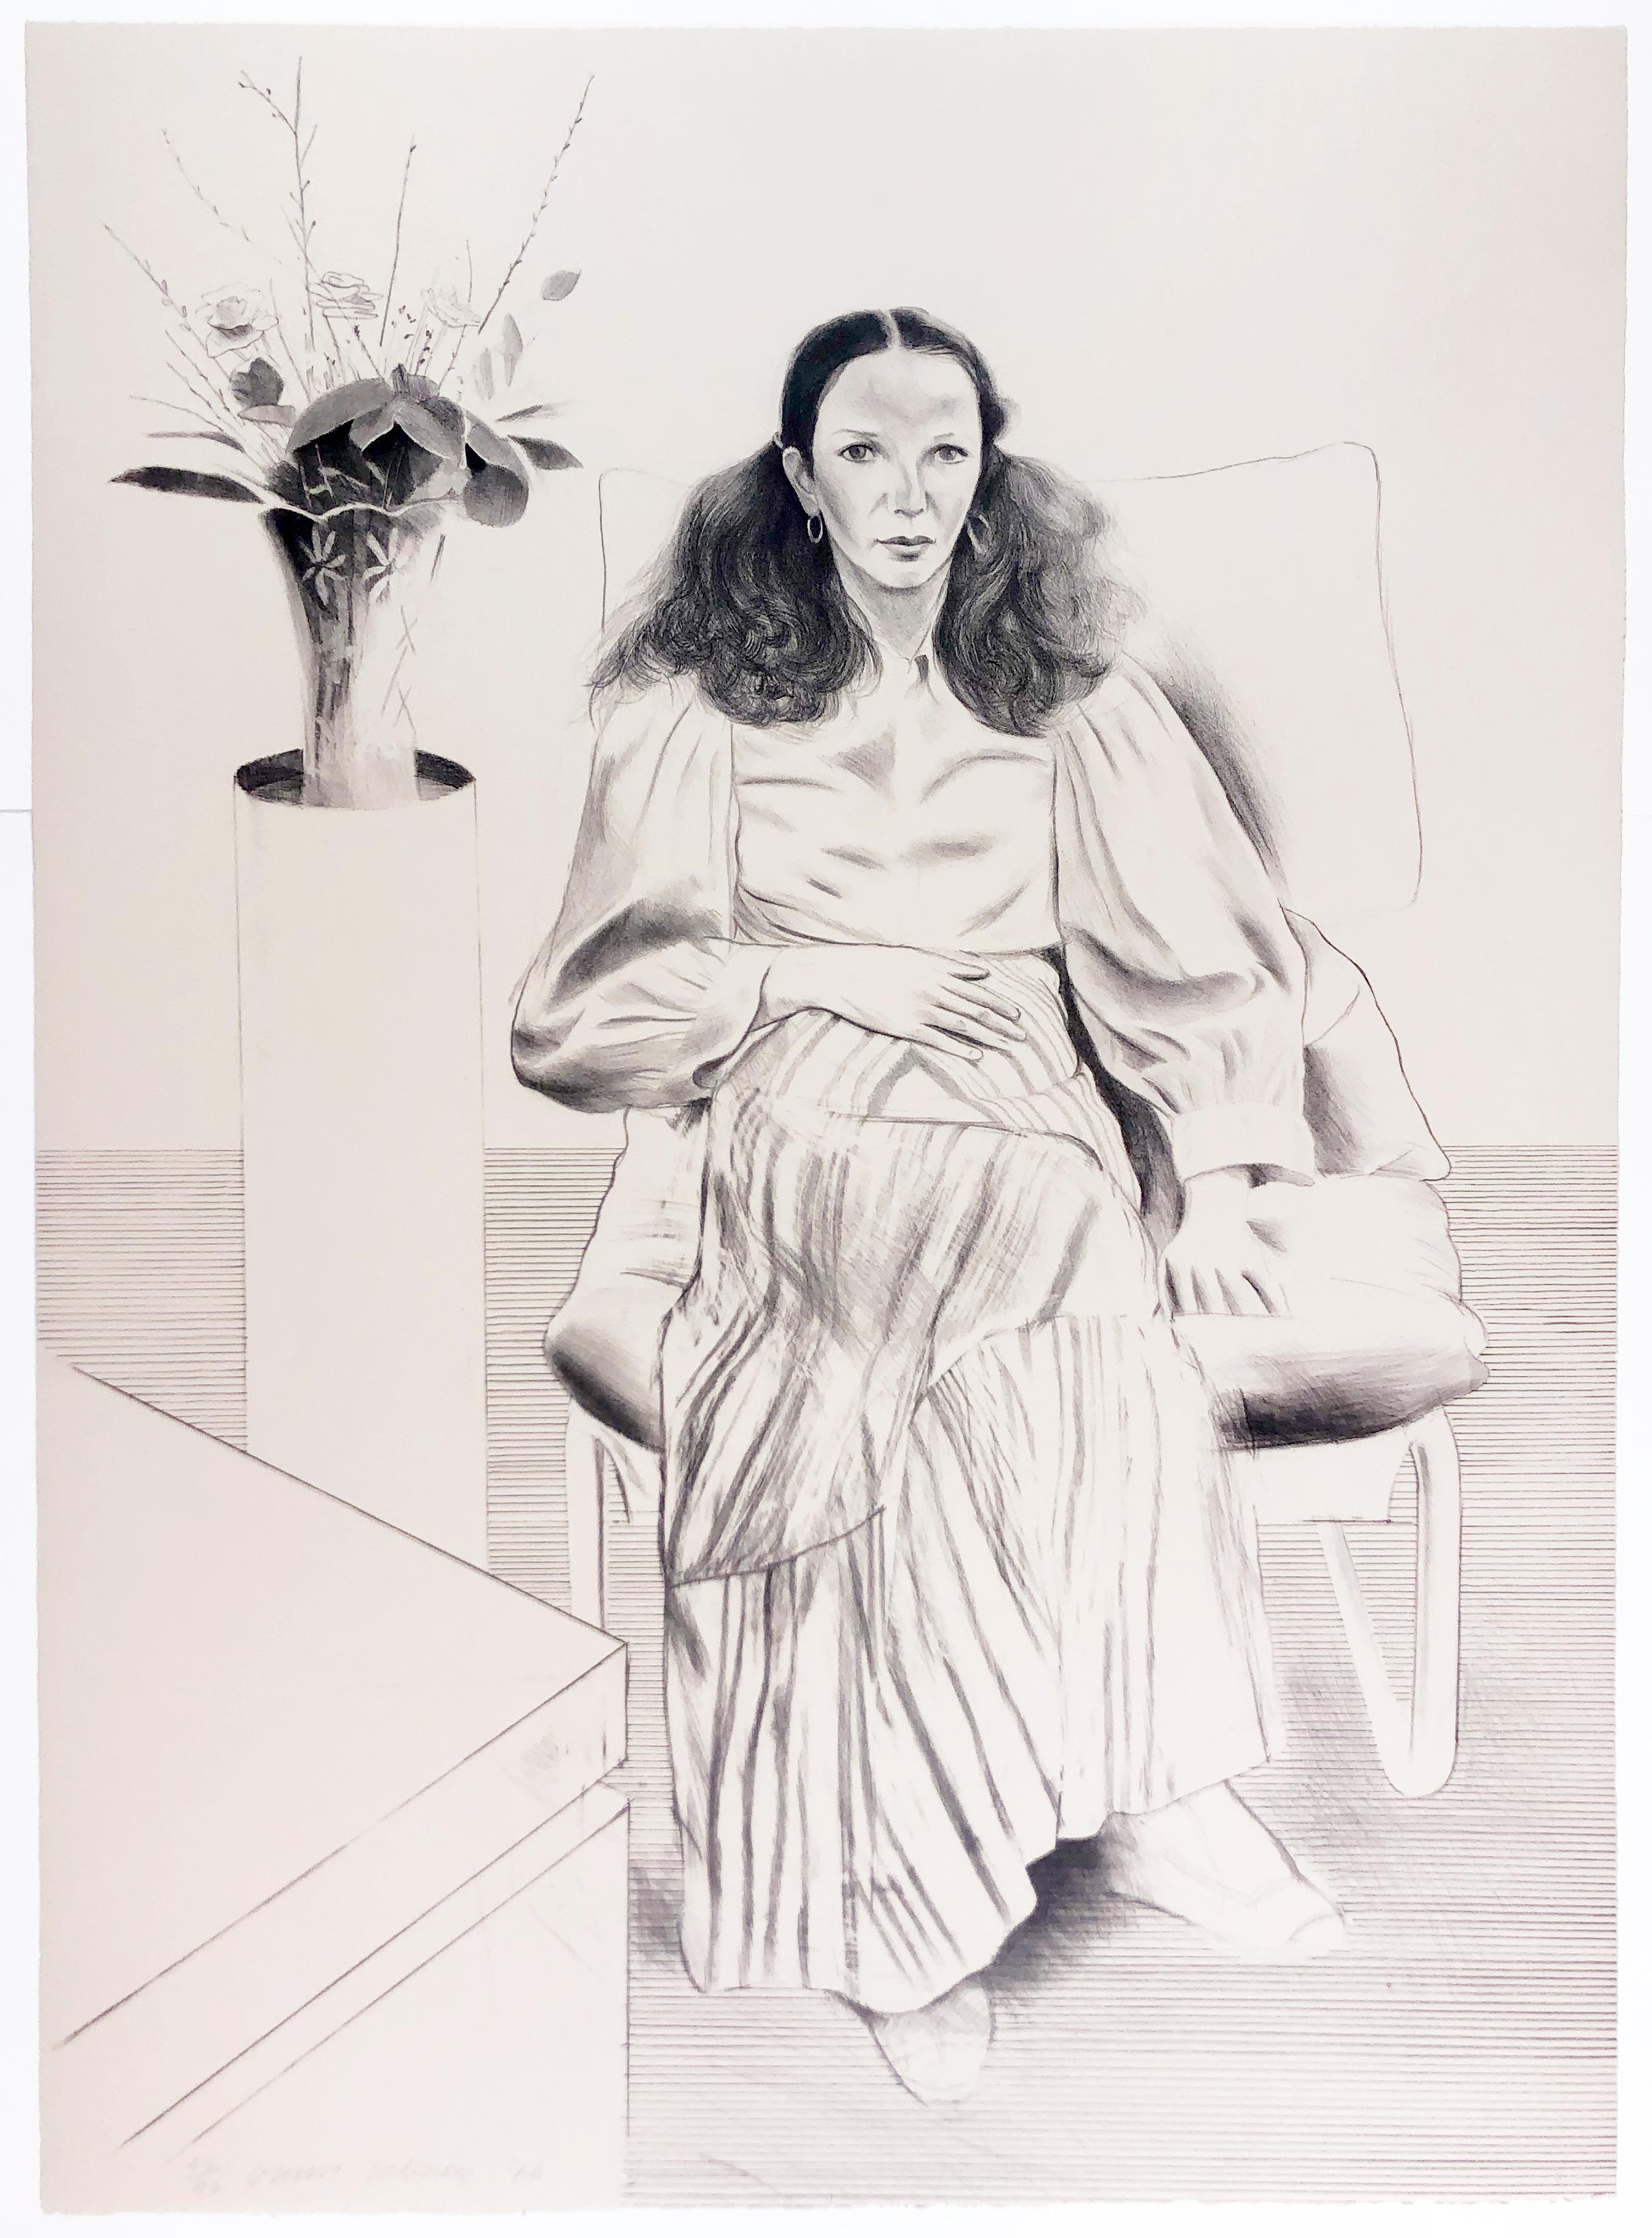 A classic David Hockney portrait, this lithograph depicts the artist's friend Brooke Hopper. Brooke Hopper, one of the Hollywood elite, is the daughter of the producer Leland Hayward and actress Margaret Sullavan, and at the time of this drawing was